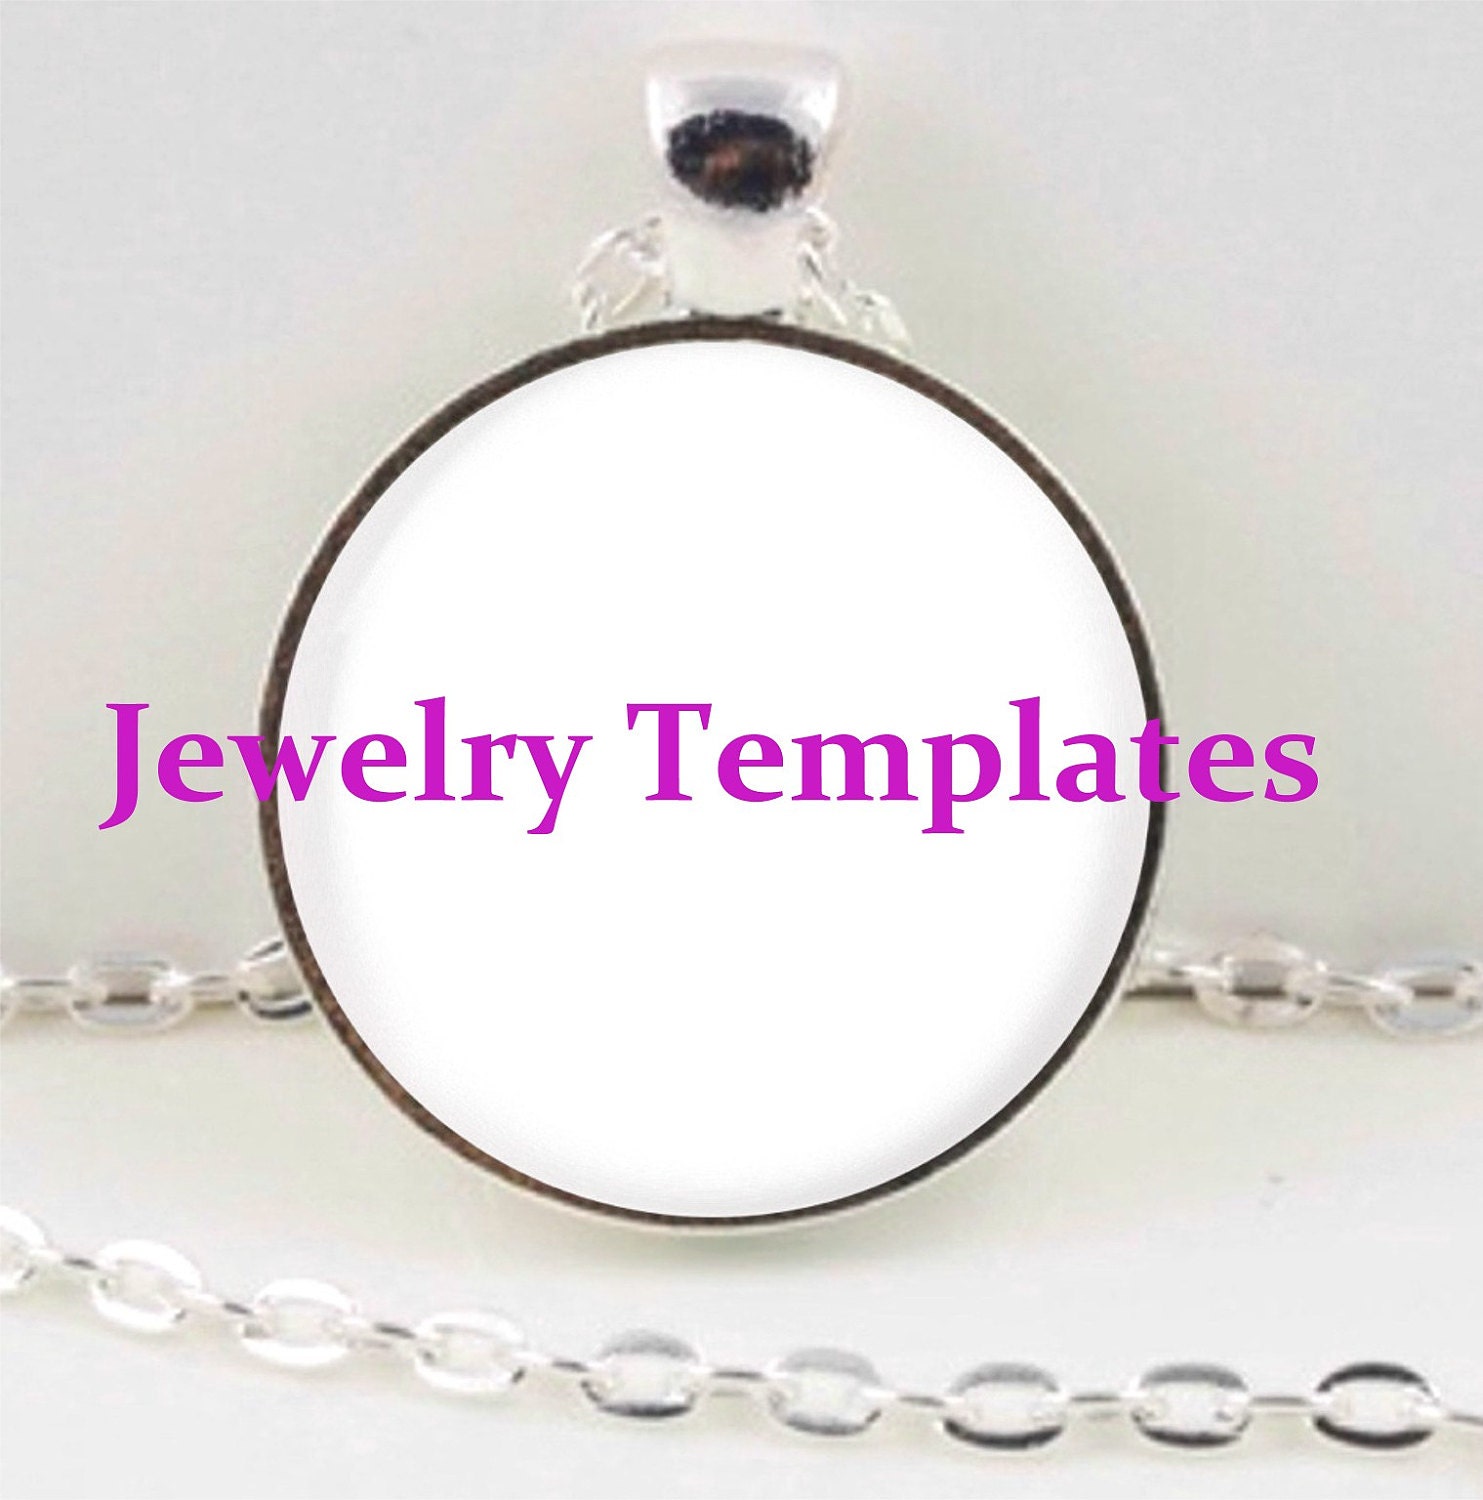 Digital Jewelry Templates Photo Templates for by JewelryTemplates